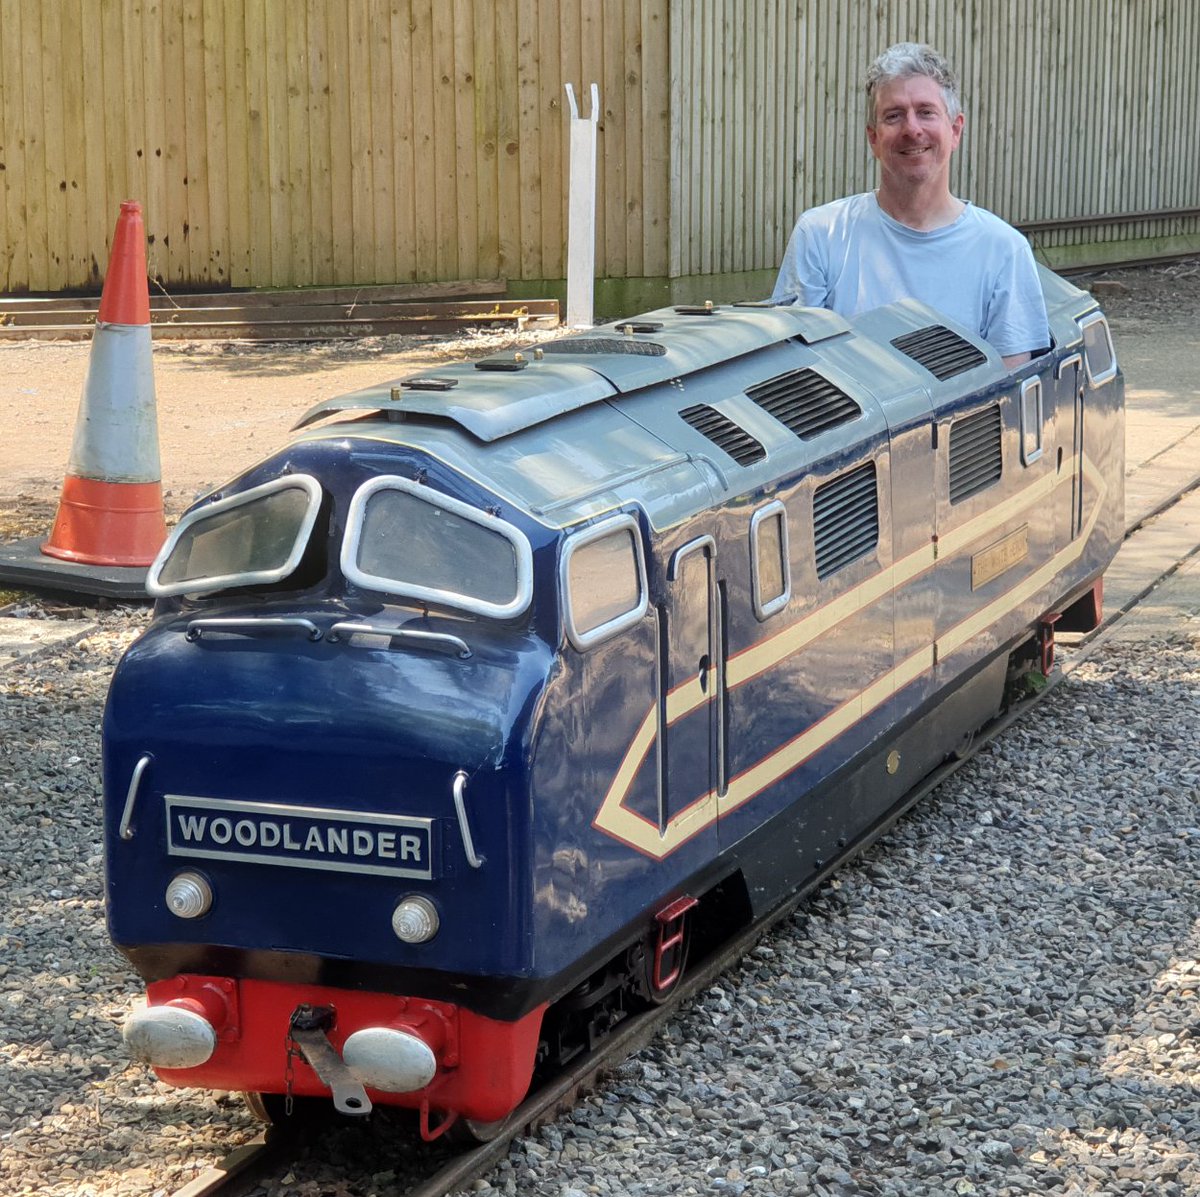 I had a great day out at the #Stapleford #Miniature #Railway today #railroad #train